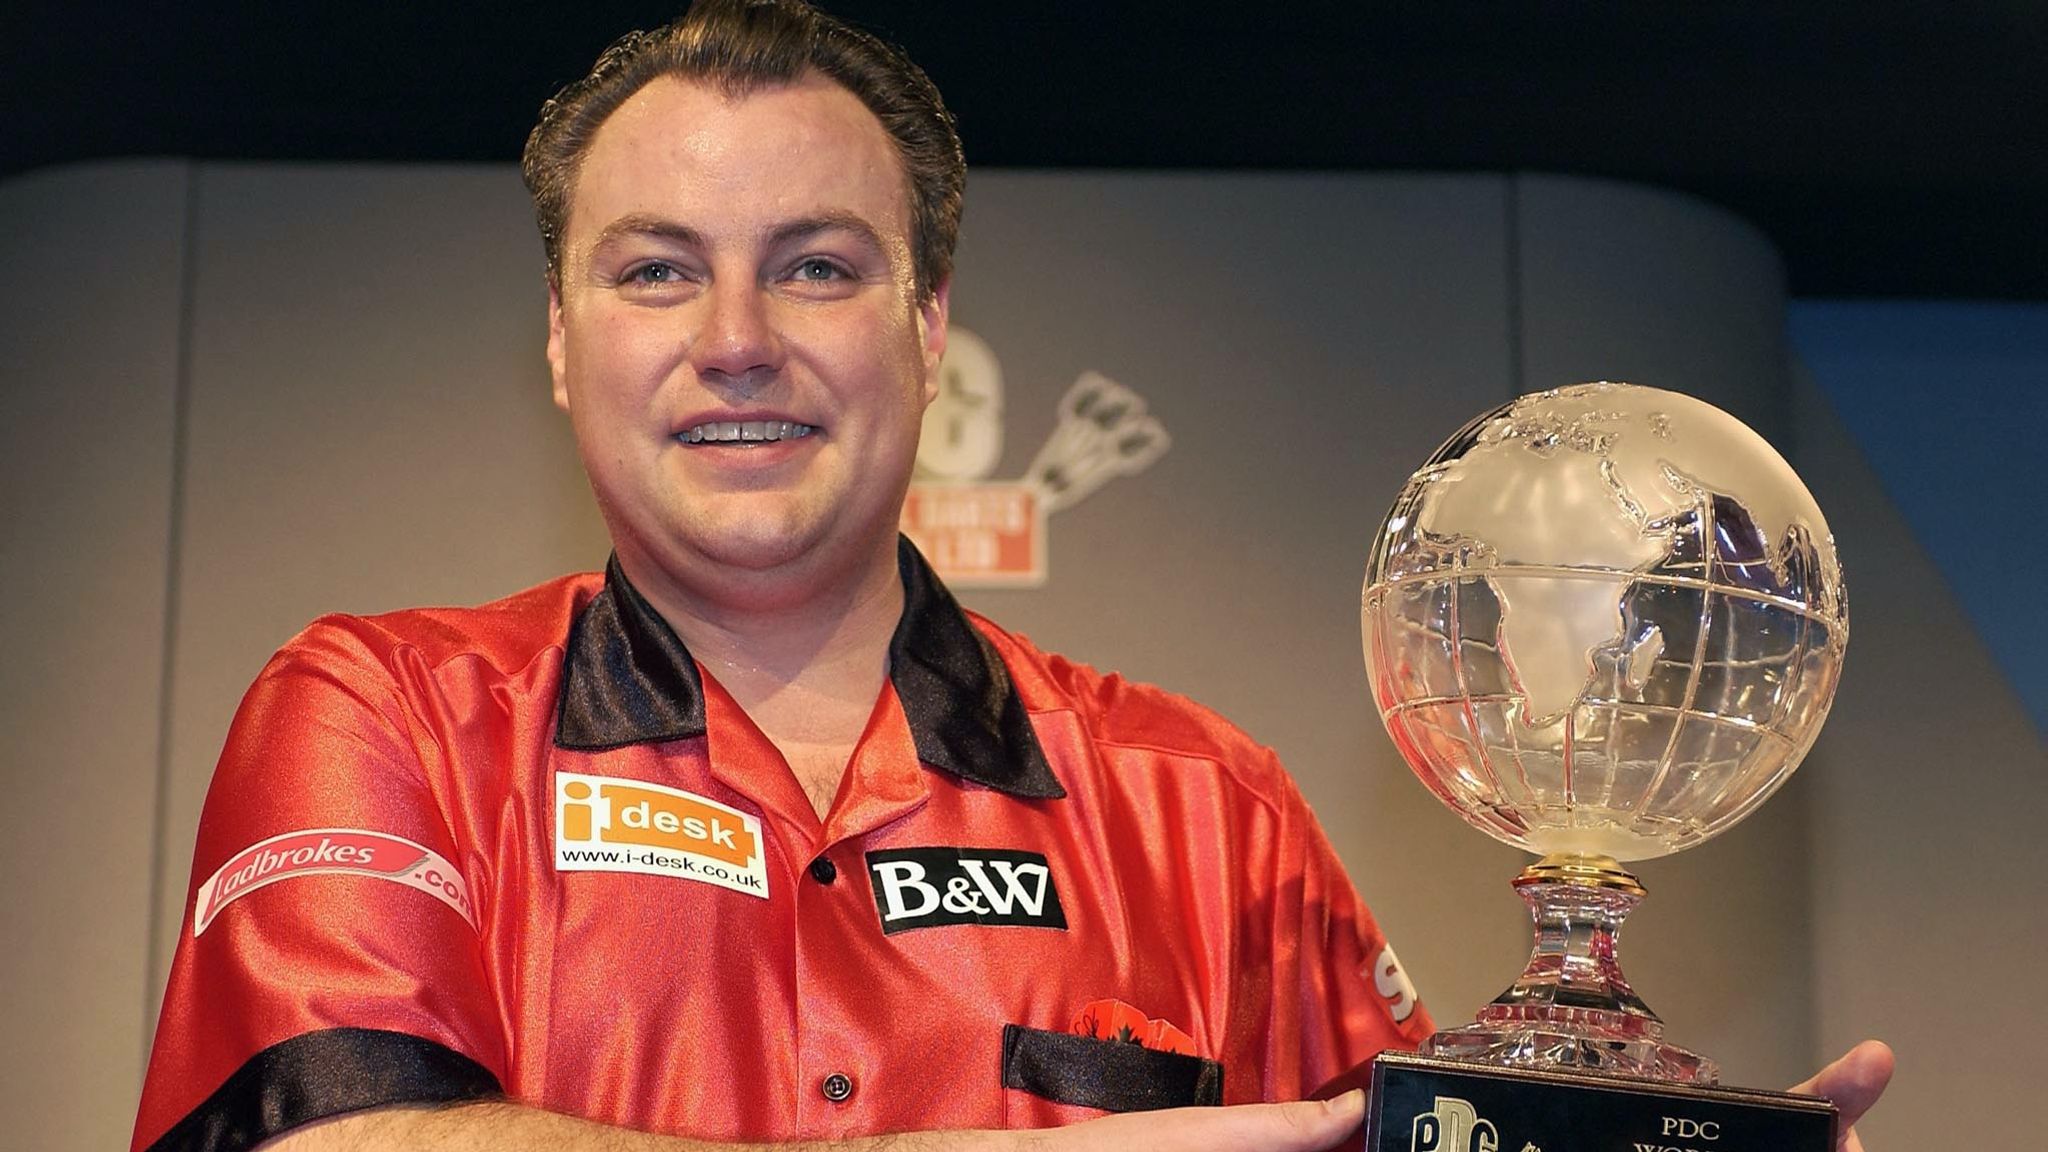 Former Darts Champion Part dreaming of landing another | Darts News | Sky Sports